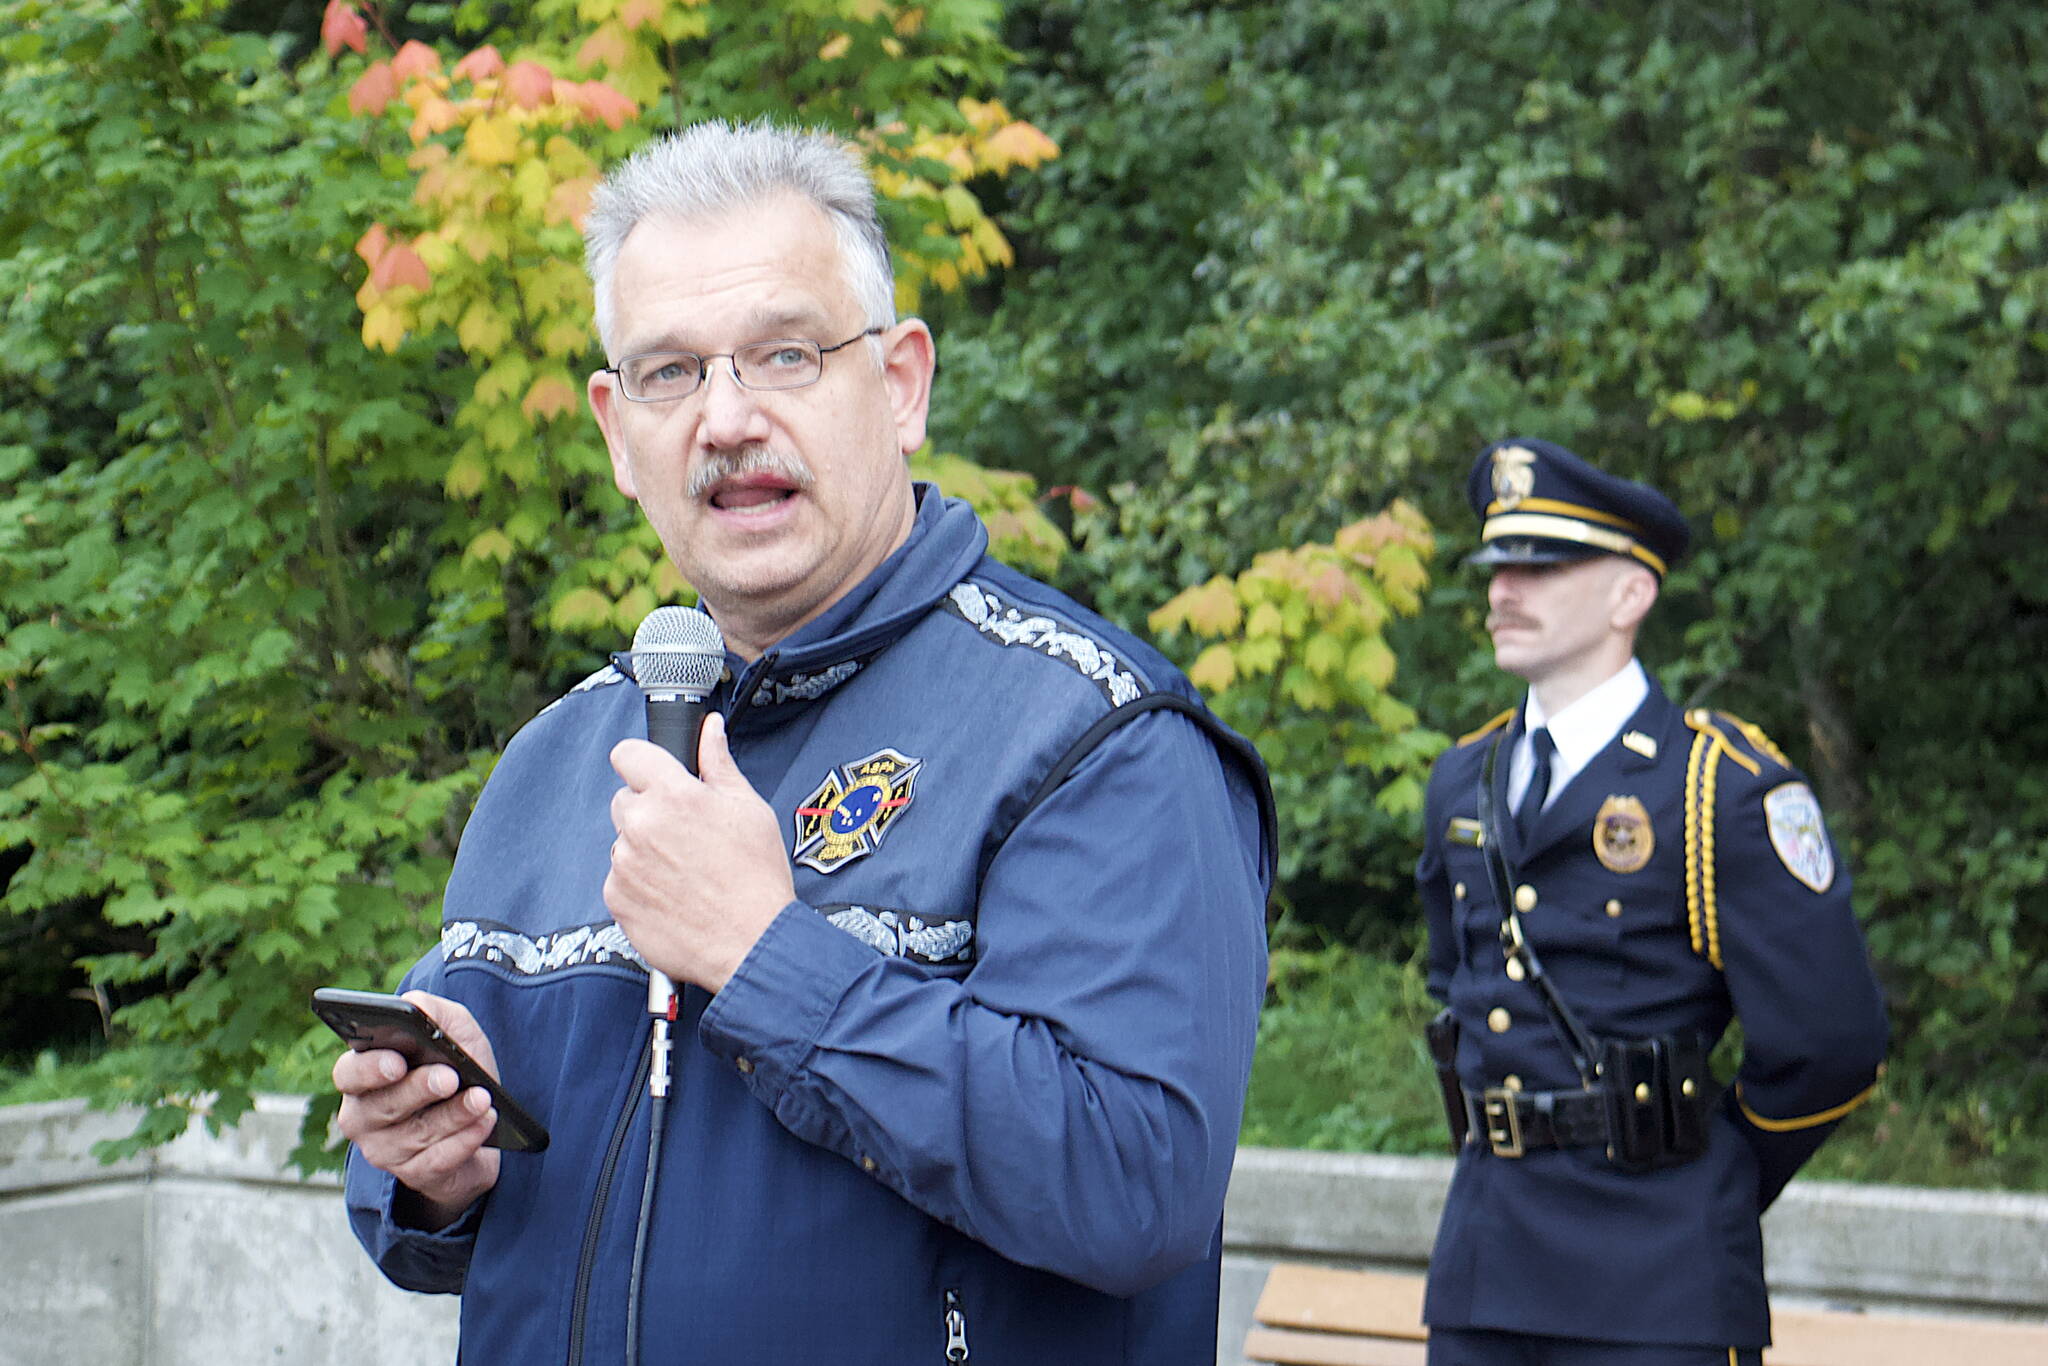 Michael Pierson, a Capital City Fire/Rescue firefighter, delivers an “invitation to remember” speech during a ceremony Monday at the September 11th Memorial at Riverside Rotary Park commemorating the terrorist attacks on that date in 2001. (Mark Sabbatini / Juneau Empire)